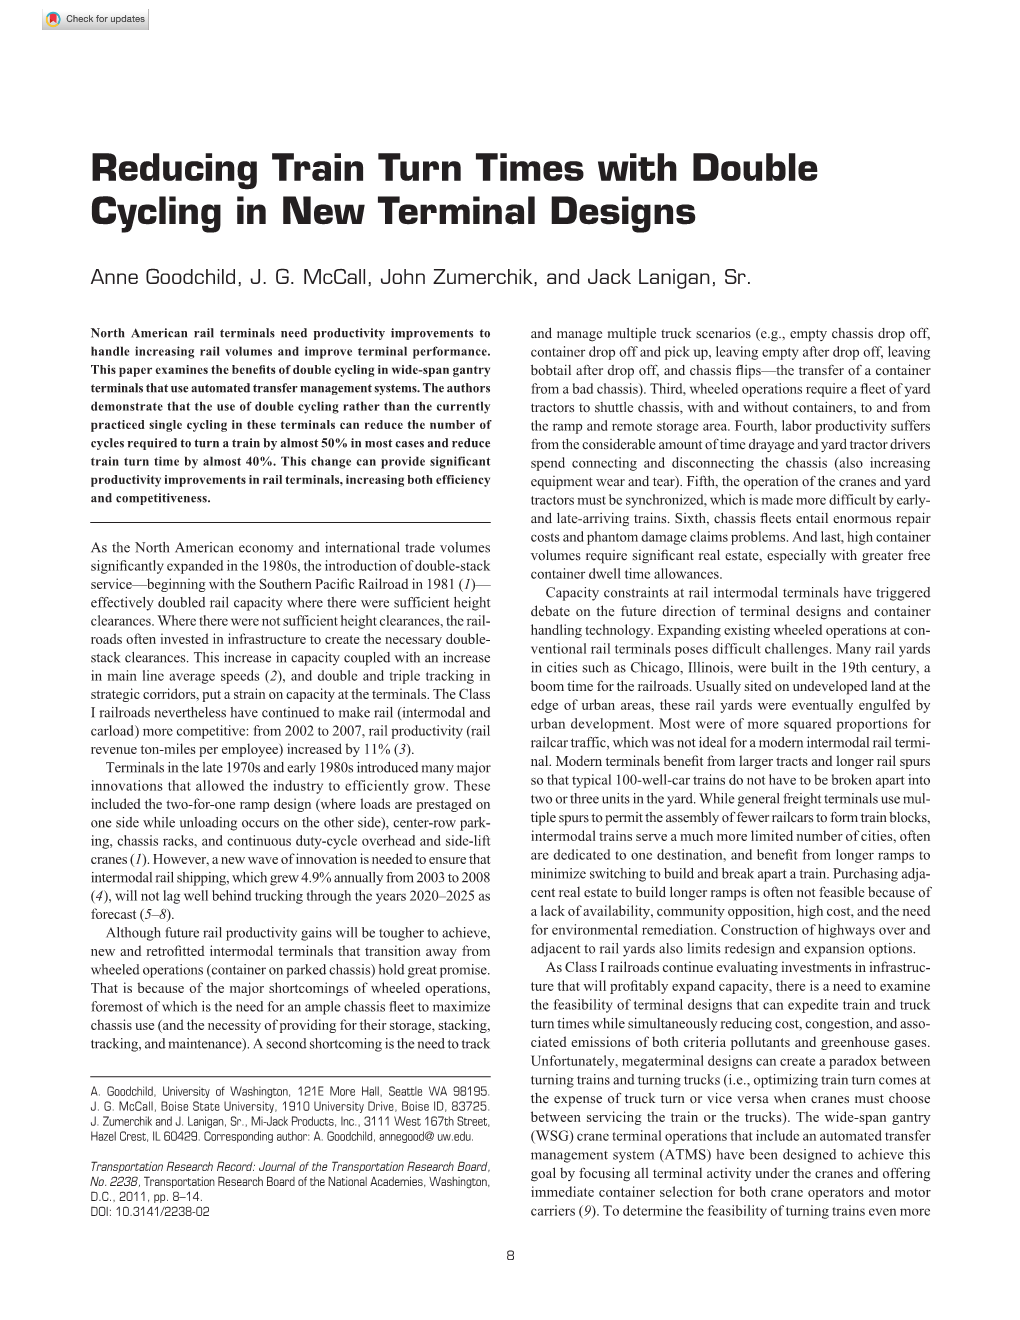 Reducing Train Turn Times with Double Cycling in New Terminal Designs